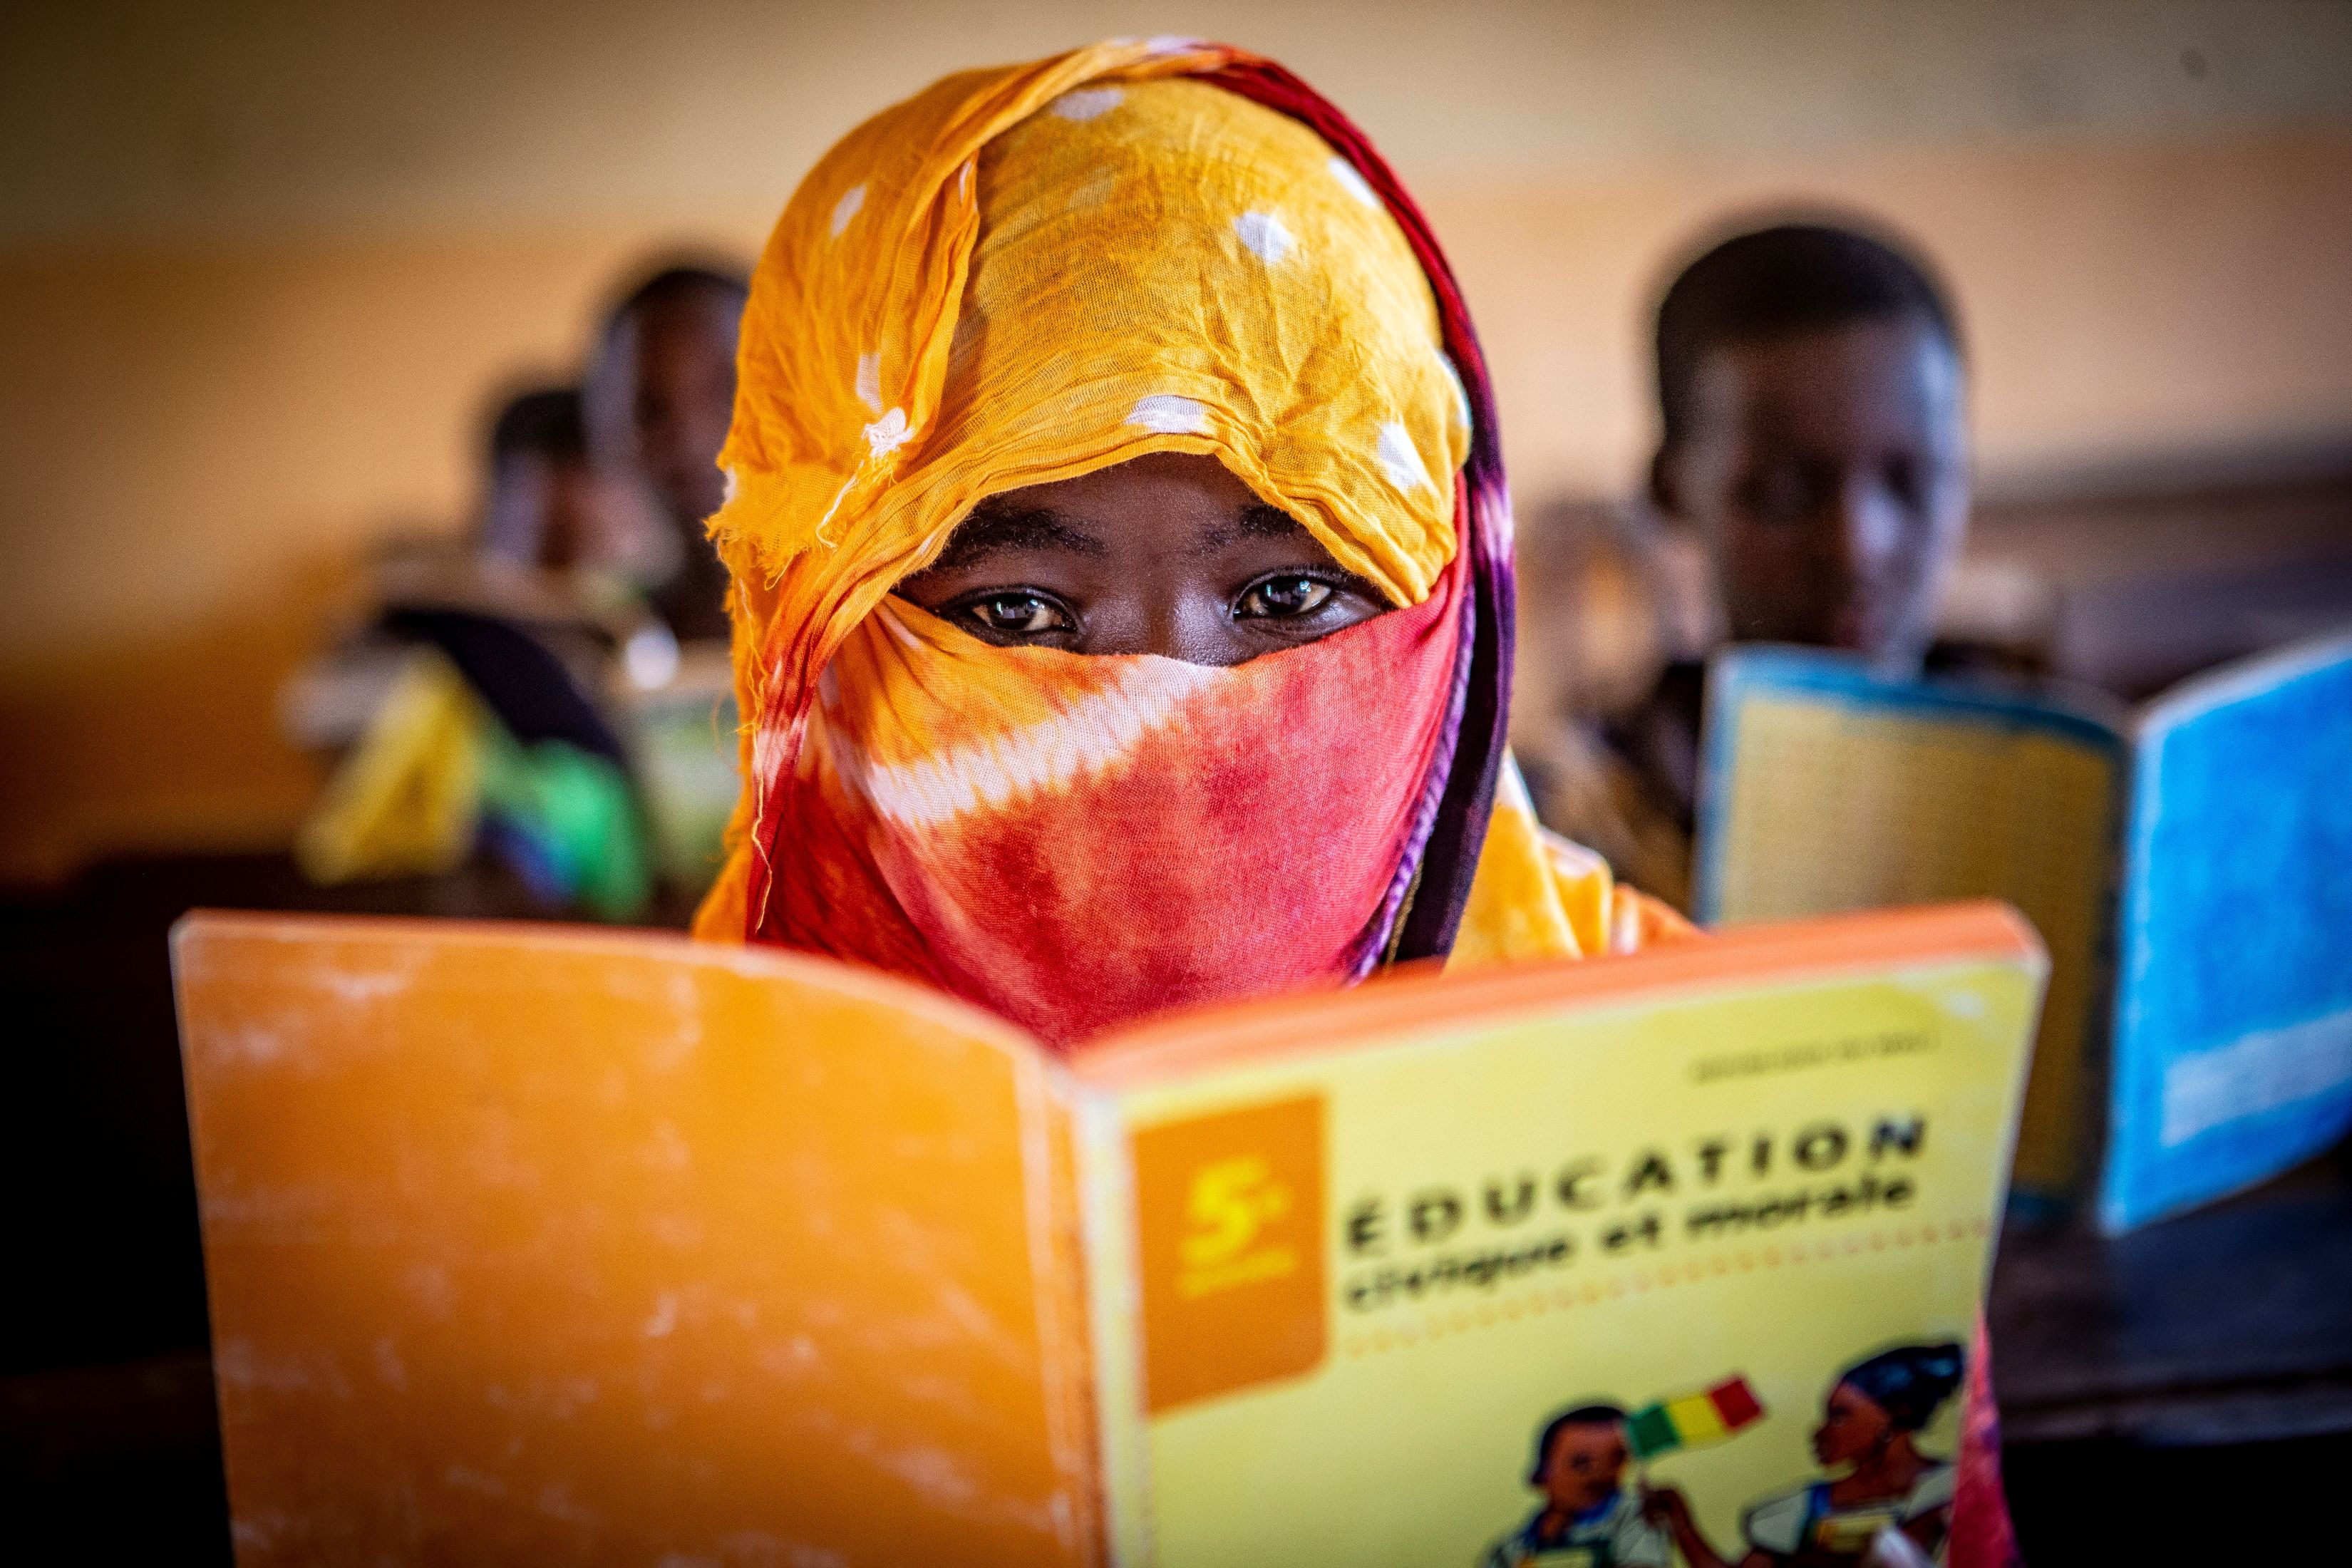 Fatoumata, who was the house helper for an armed group, attends elementary school after she was helped by UNICEF and its partners, in Kidal